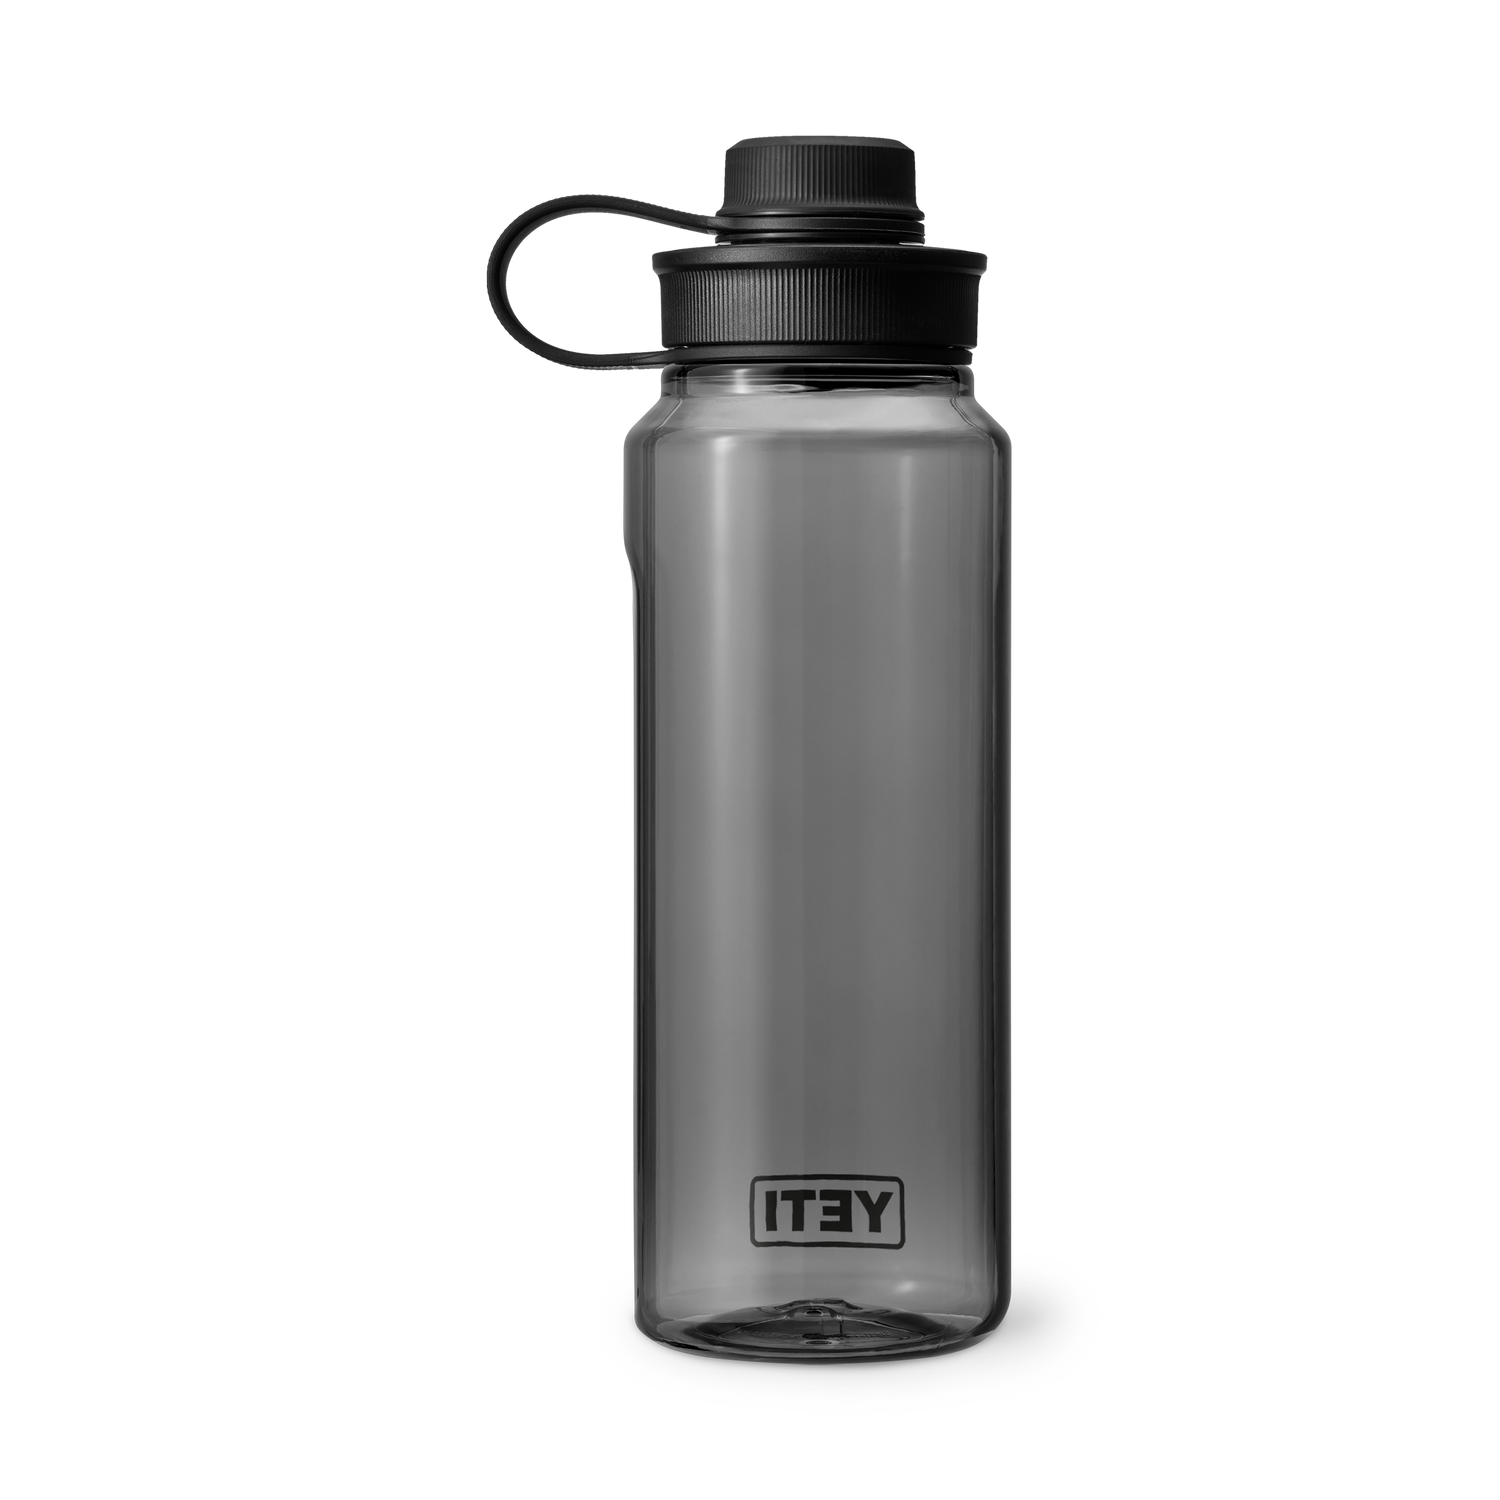 YETI_Wholesale_Drinkware_Yonder_Tether_Accs_1L_Charcoal_Back_0768_B_2400x2400.png